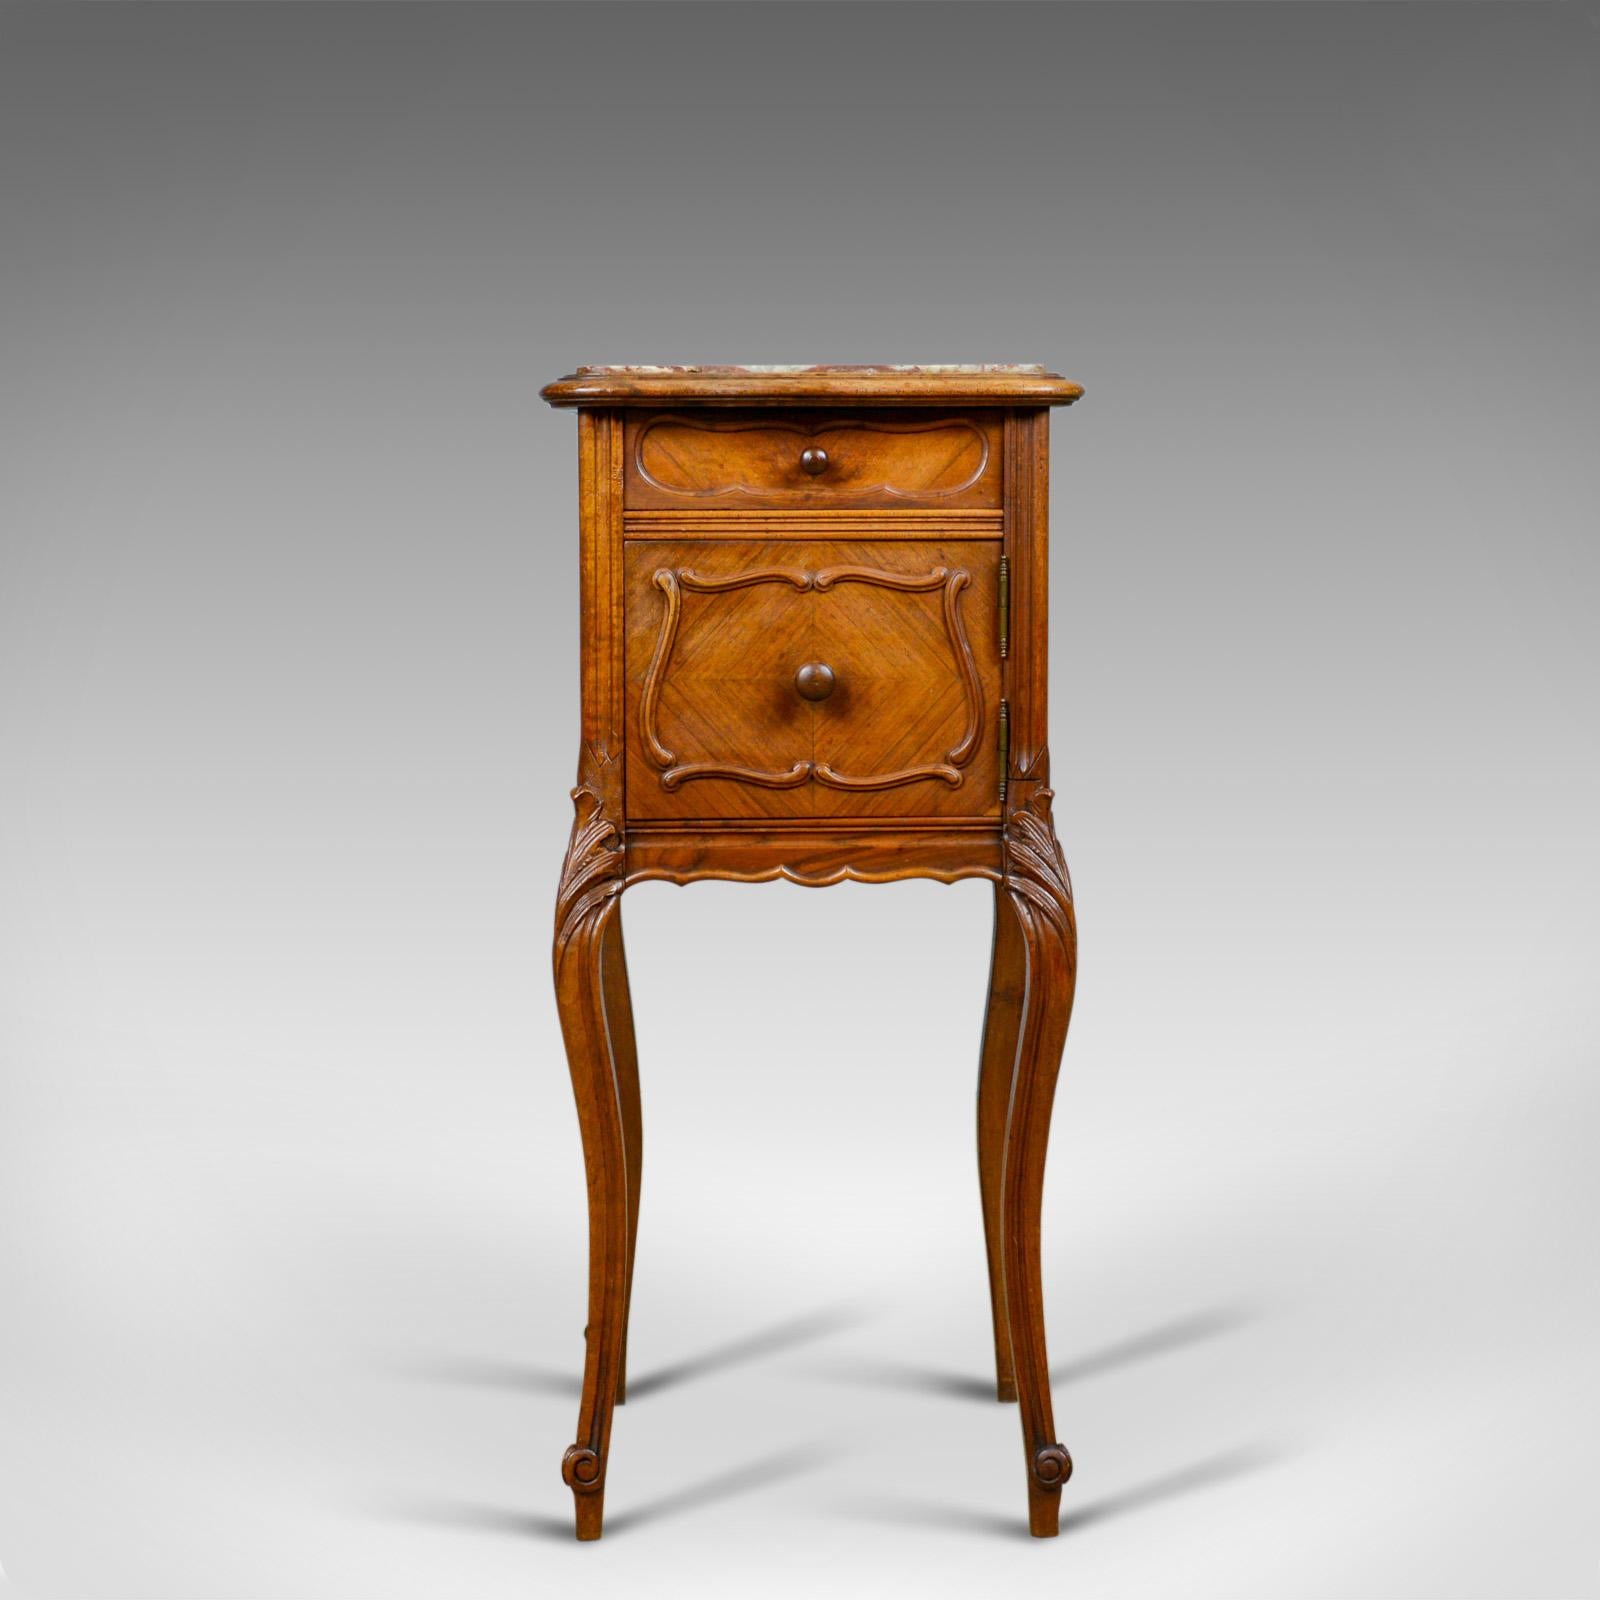 This is an antique French bedside cabinet. A Victorian, walnut, marble top, pot cupboard dating to circa 1890.

Elegant form in good proportion and of quality craftsmanship
Attractive tones to the walnut with a mellow wax polished finish
Well